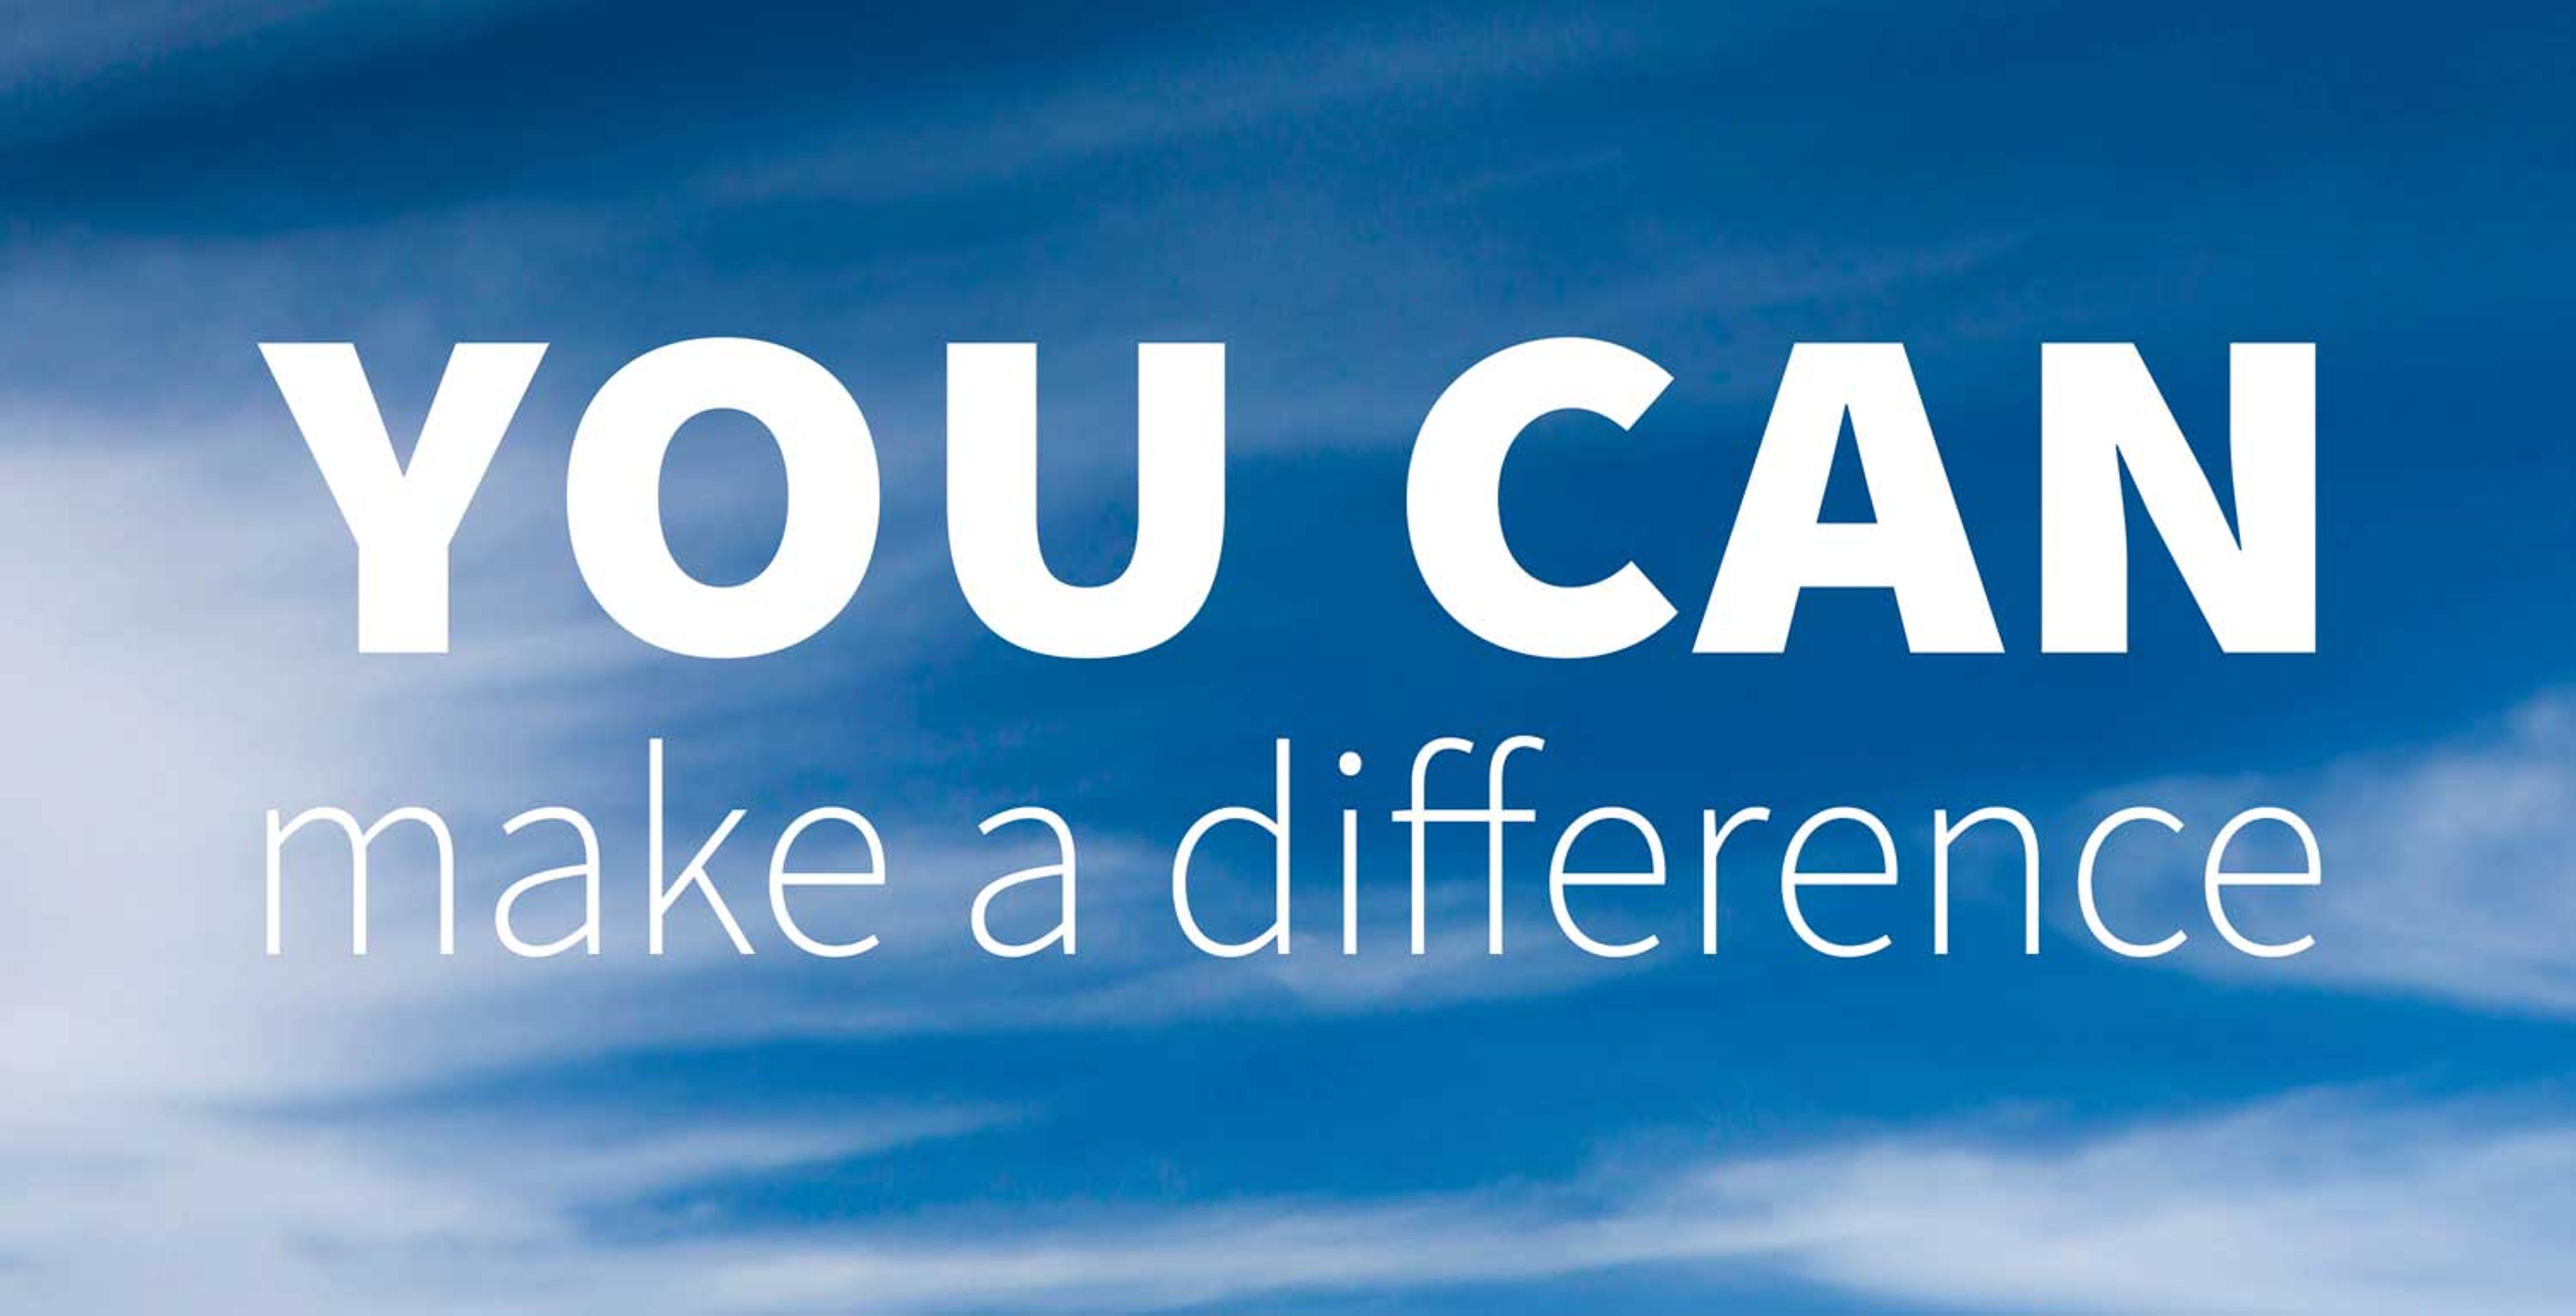 you can make a difference motivational quote